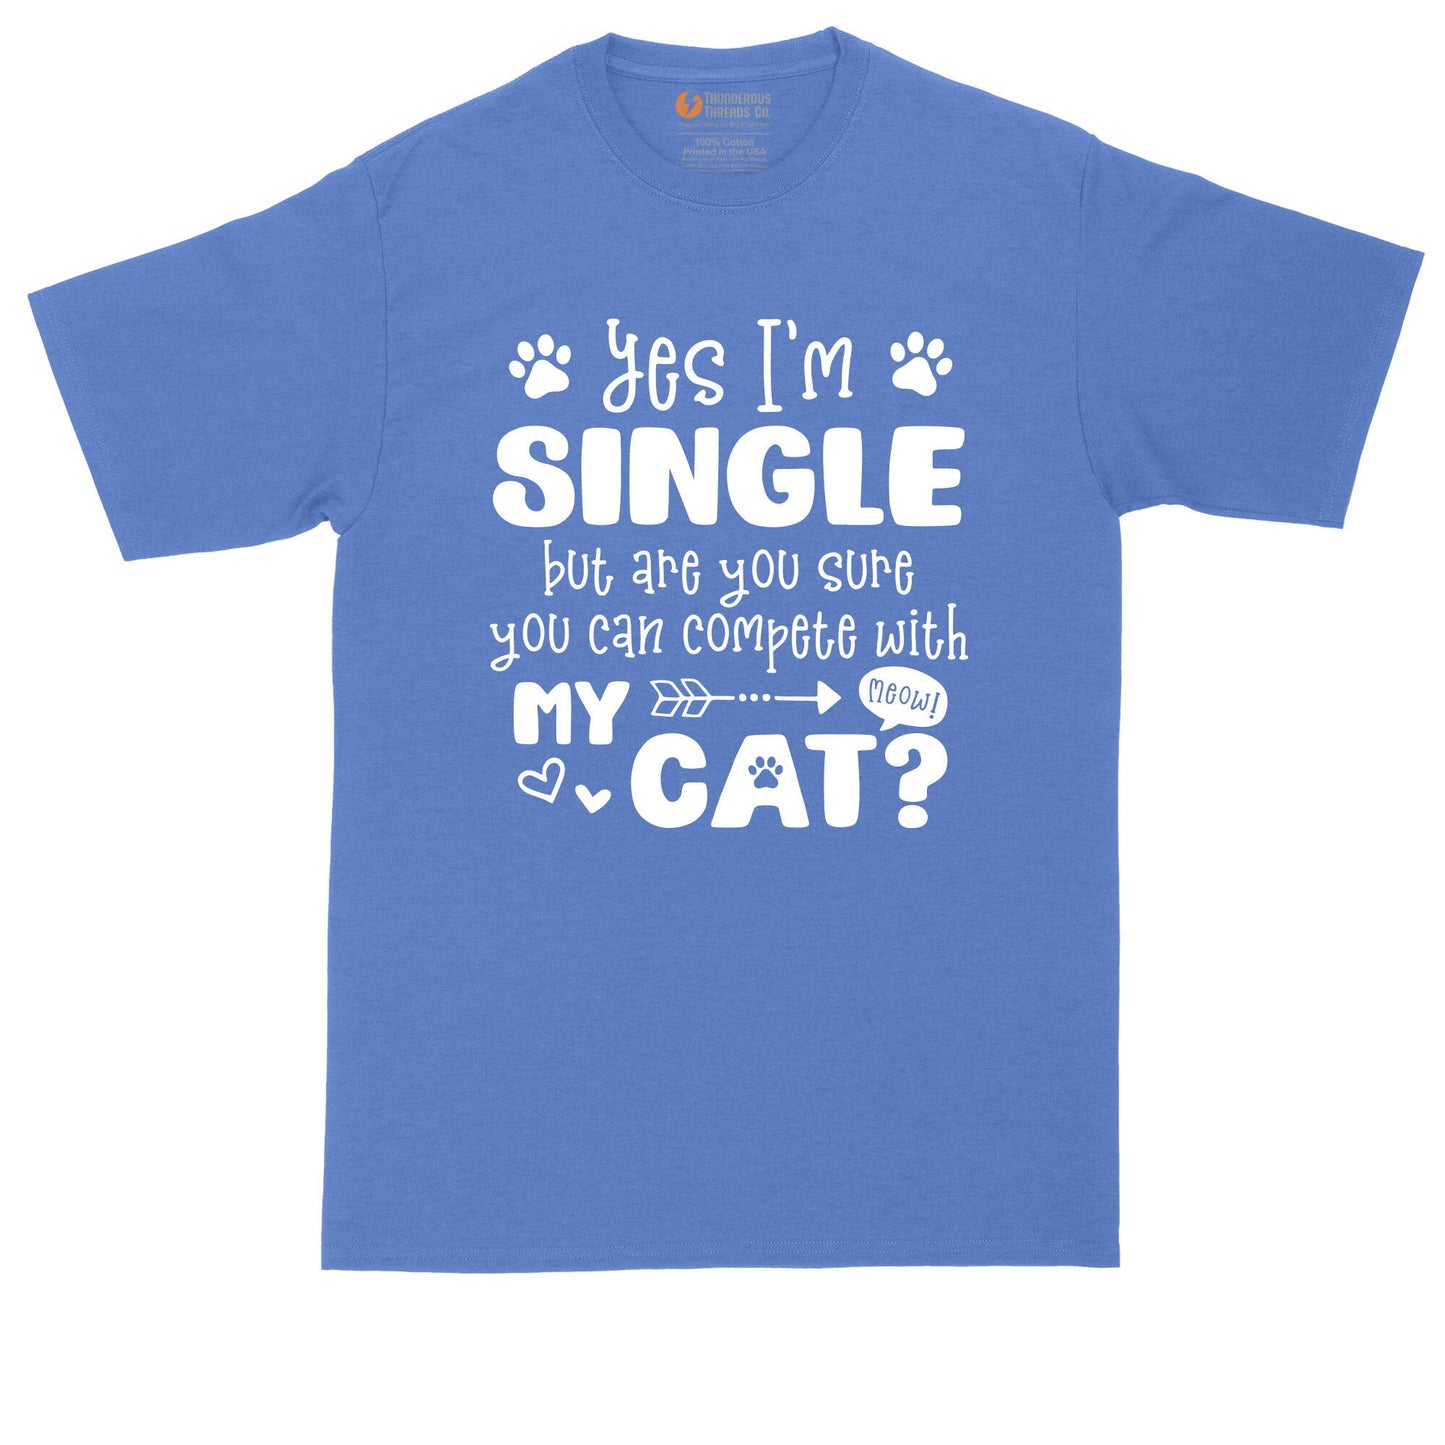 Yes I'm Single But Are You Sure You Can Compete With My Cat | Mens Big & Tall T-Shirt